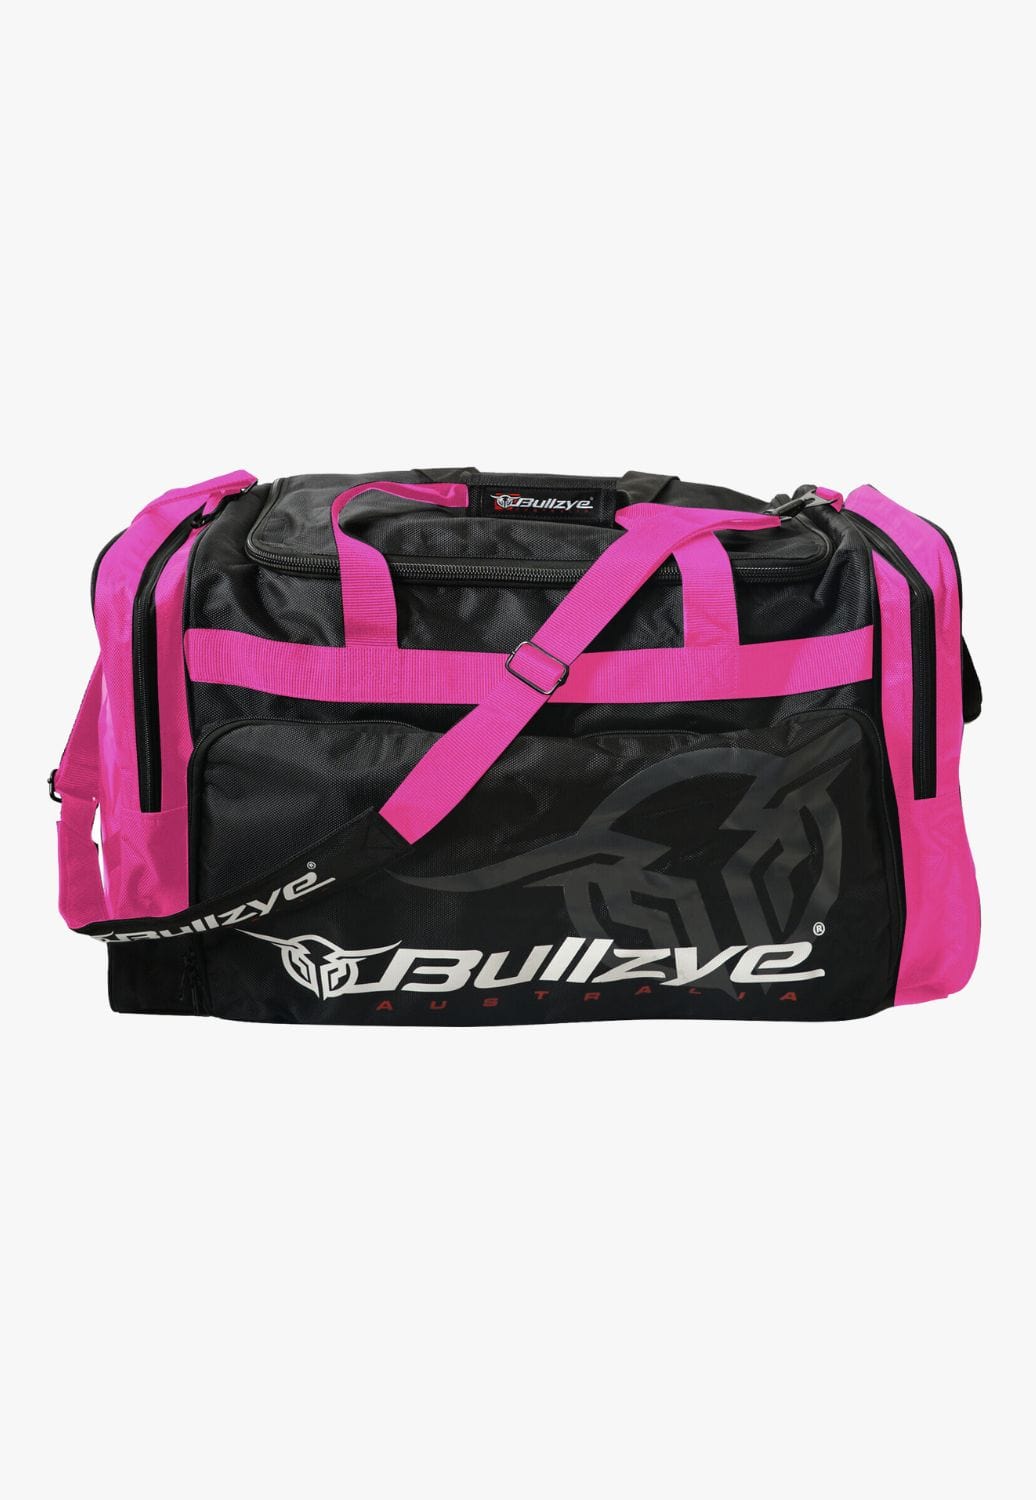 Bullzye TRAVEL - Travel Bags Pink/Black Bullzye Traction Small Gear Bag